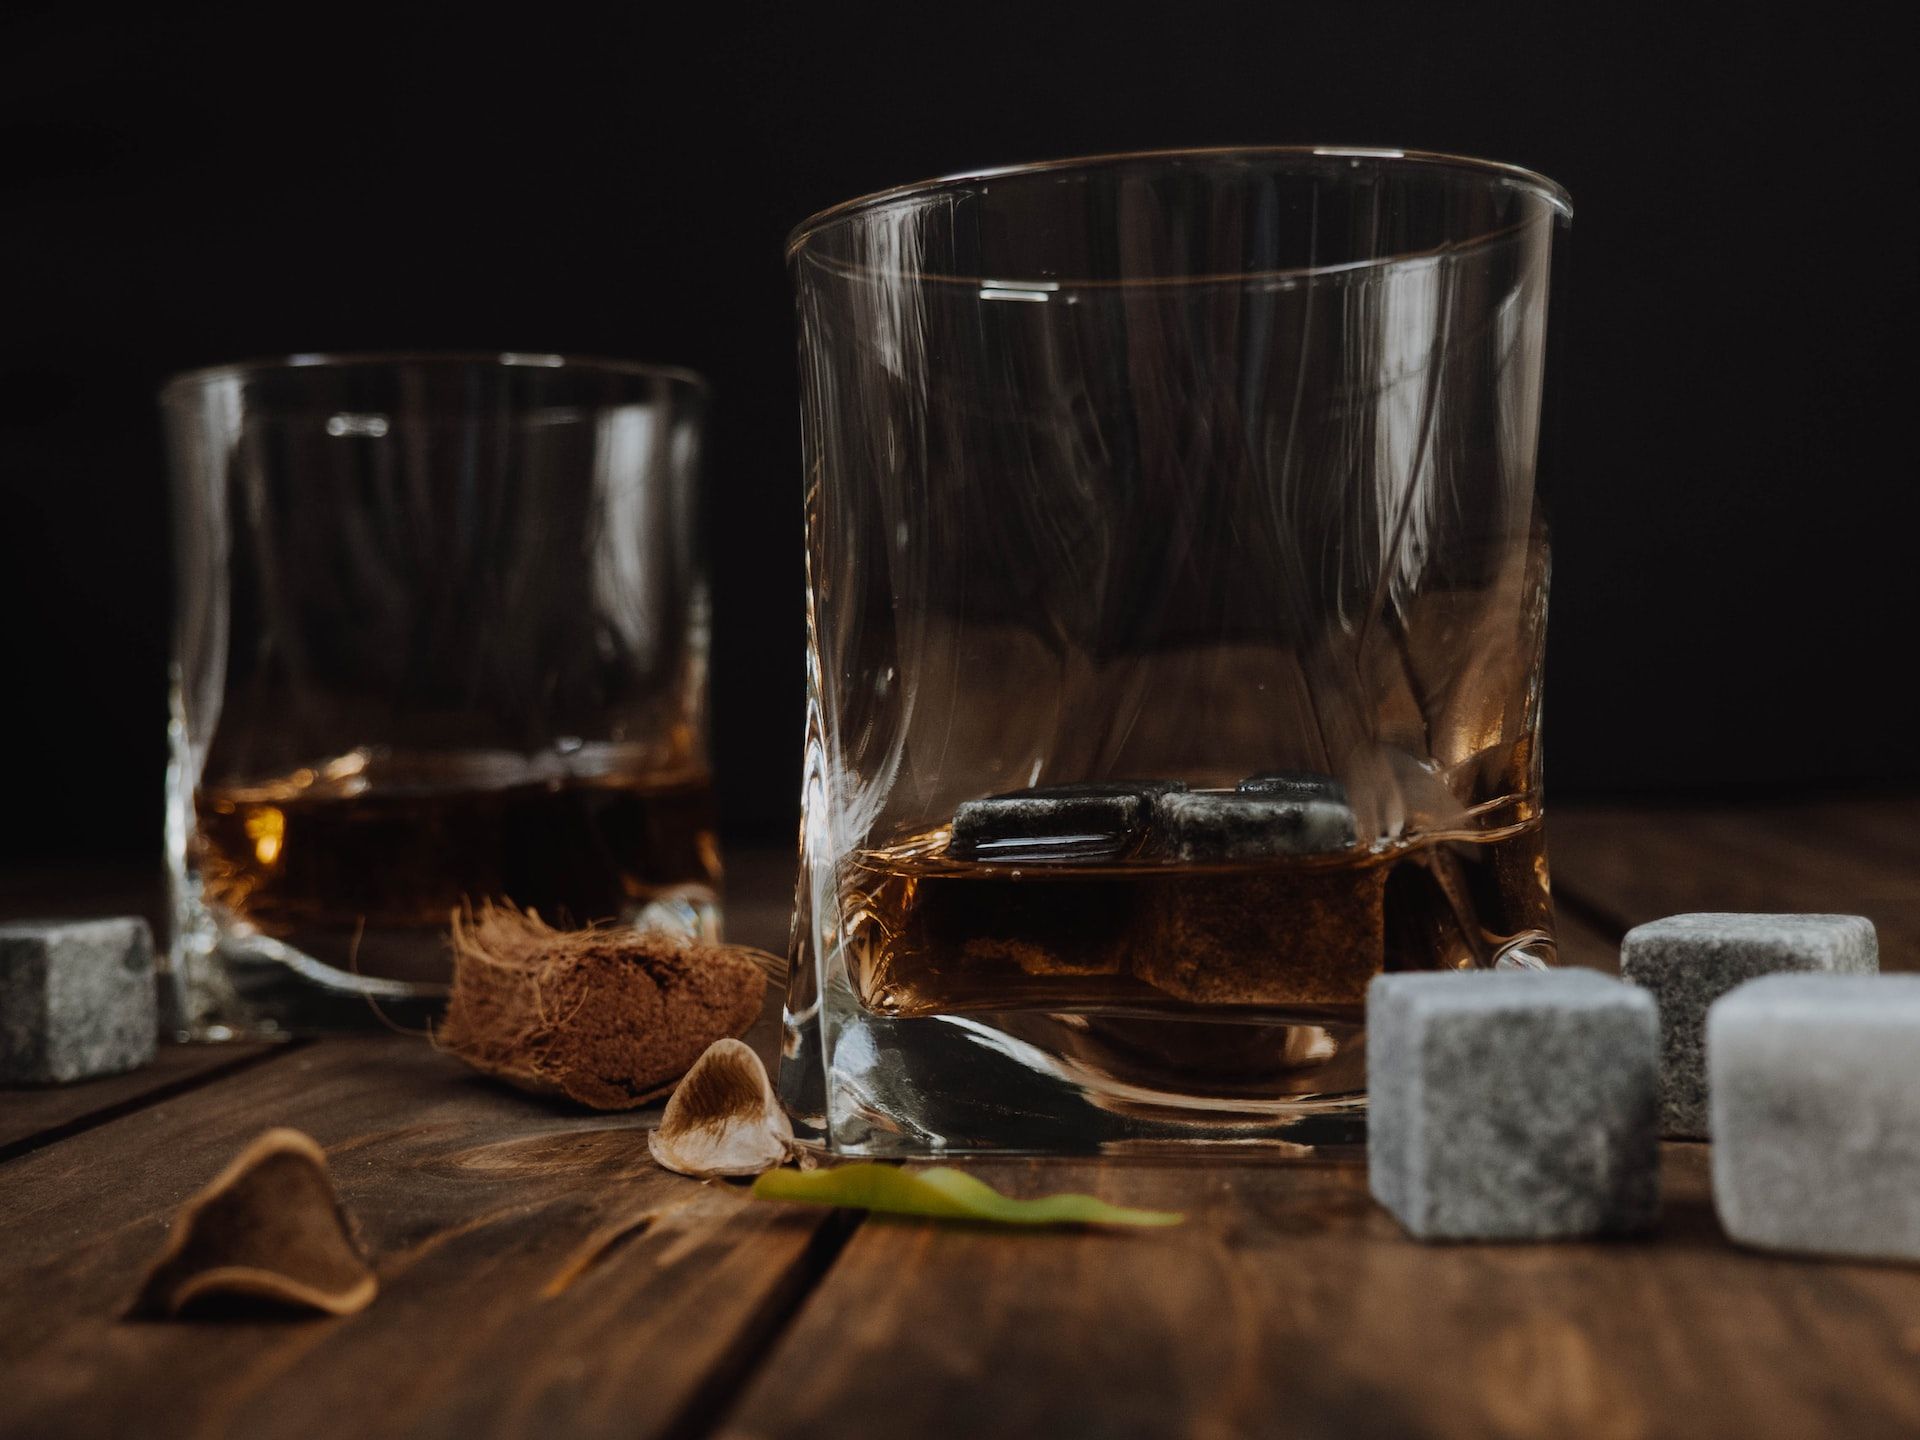 Two whiskey glasses on a wooden table.